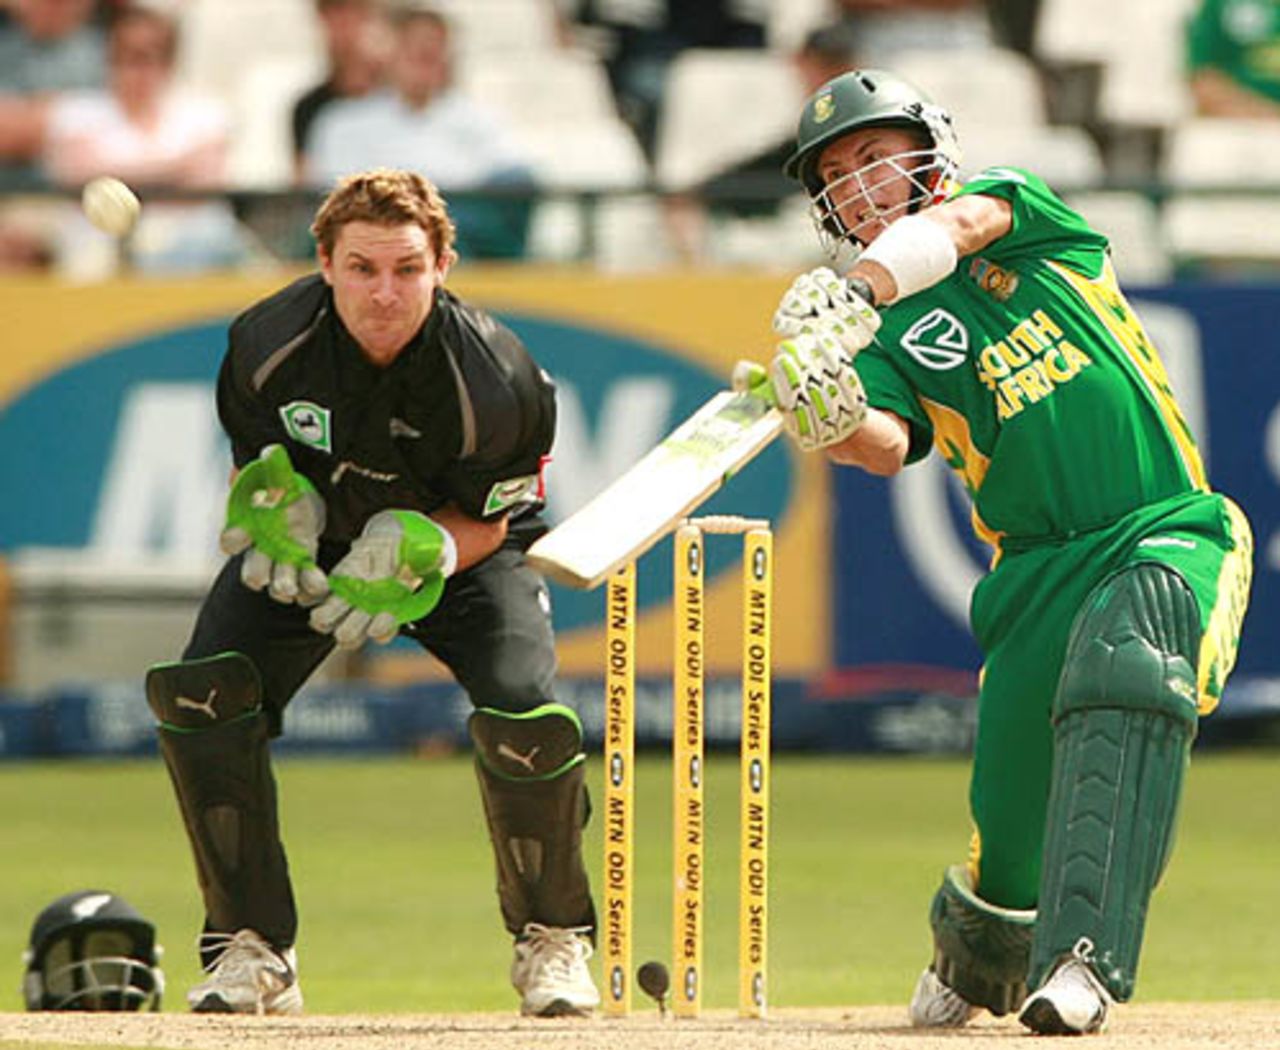 Herschelle Gibbs powers the ball through the off side, South Africa v New Zealand, 3rd ODI, Cape Town, December 2, 2007